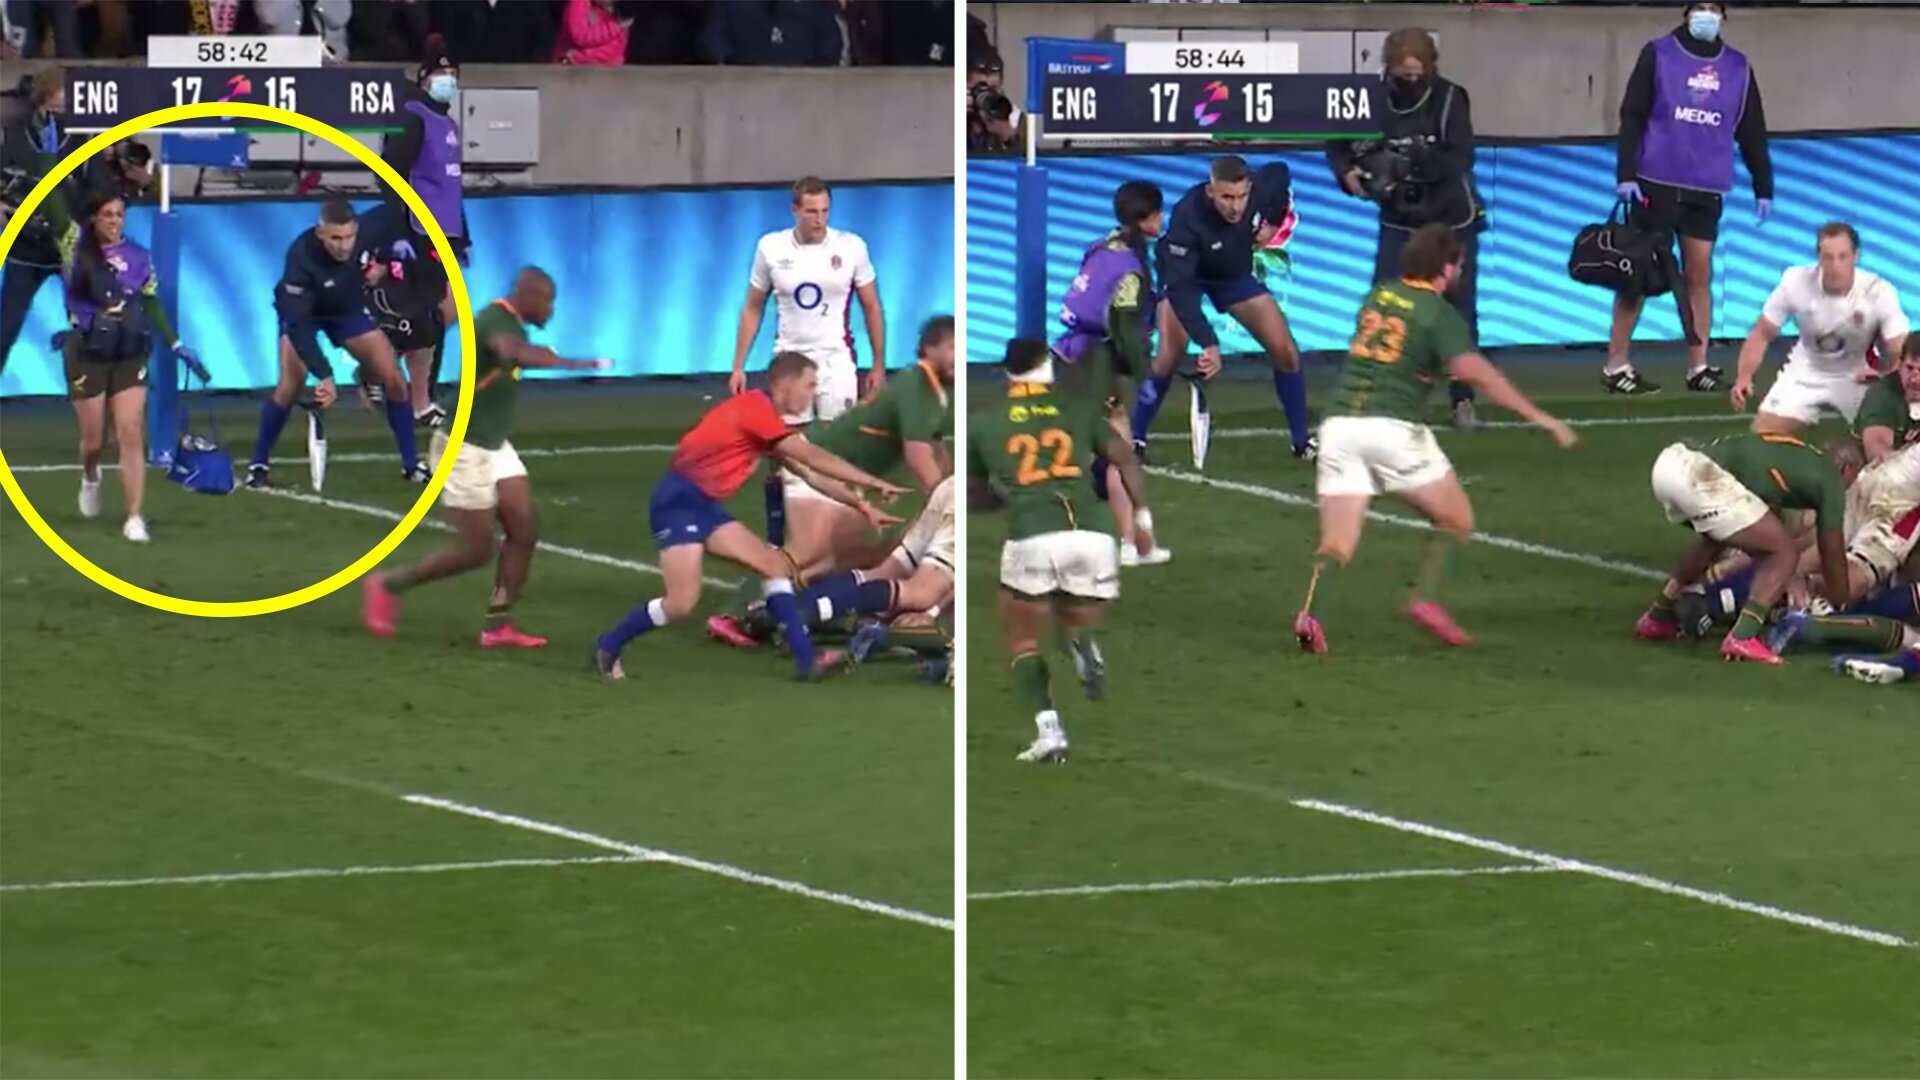 England rugby officials furious after Springboks try to add 16th player mid play